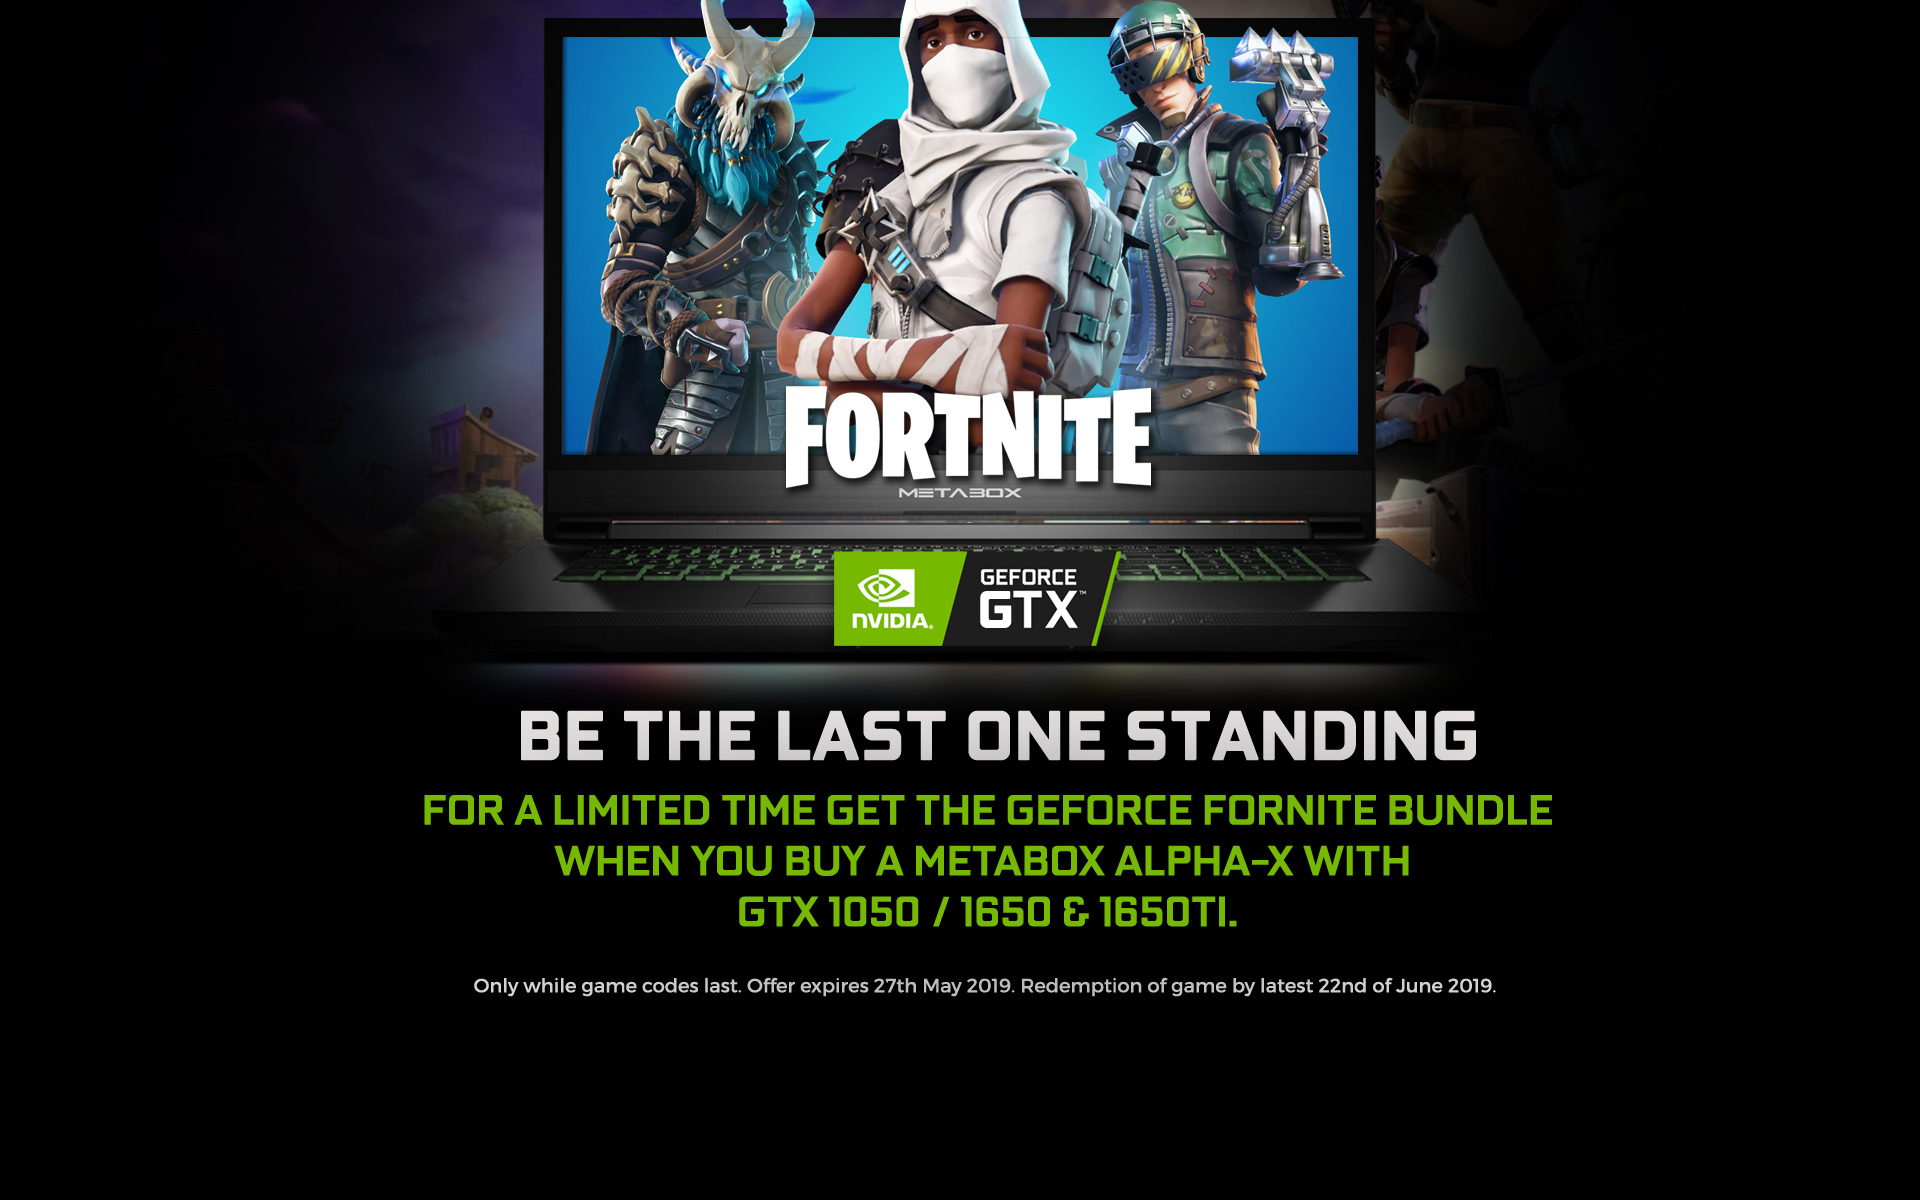 GeForce GTX Fortnite Bundle, Featuring The Counterattack Set